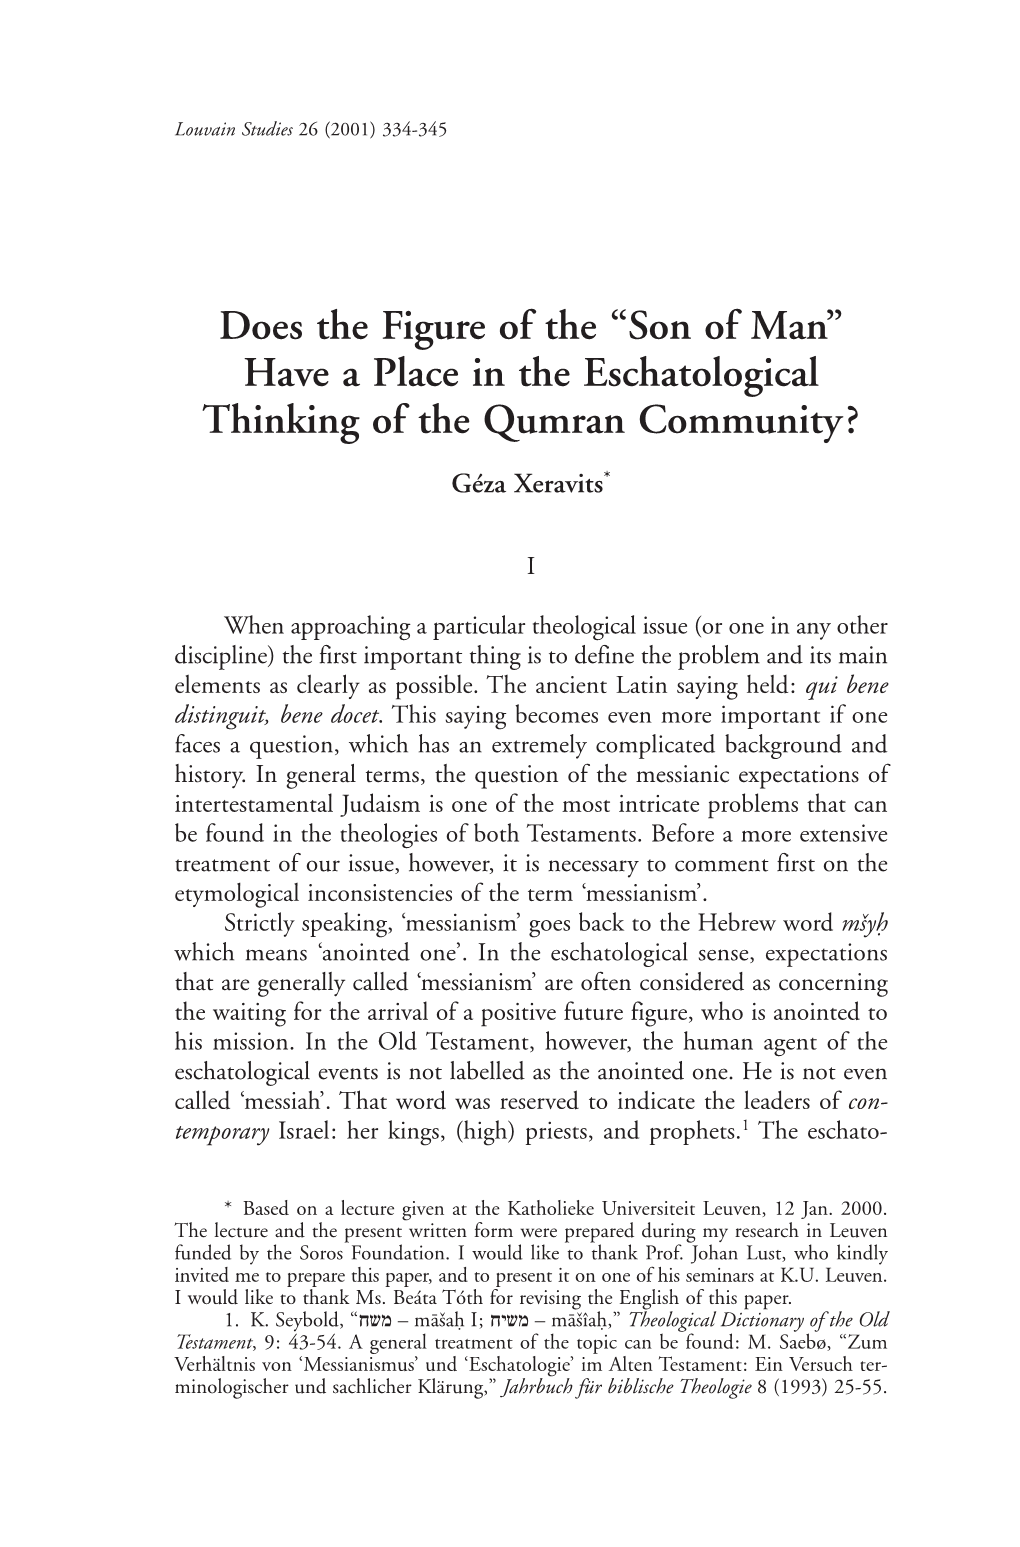 “Son of Man” Have a Place in the Eschatological Thinking of the Qumran Community? Géza Xeravits*